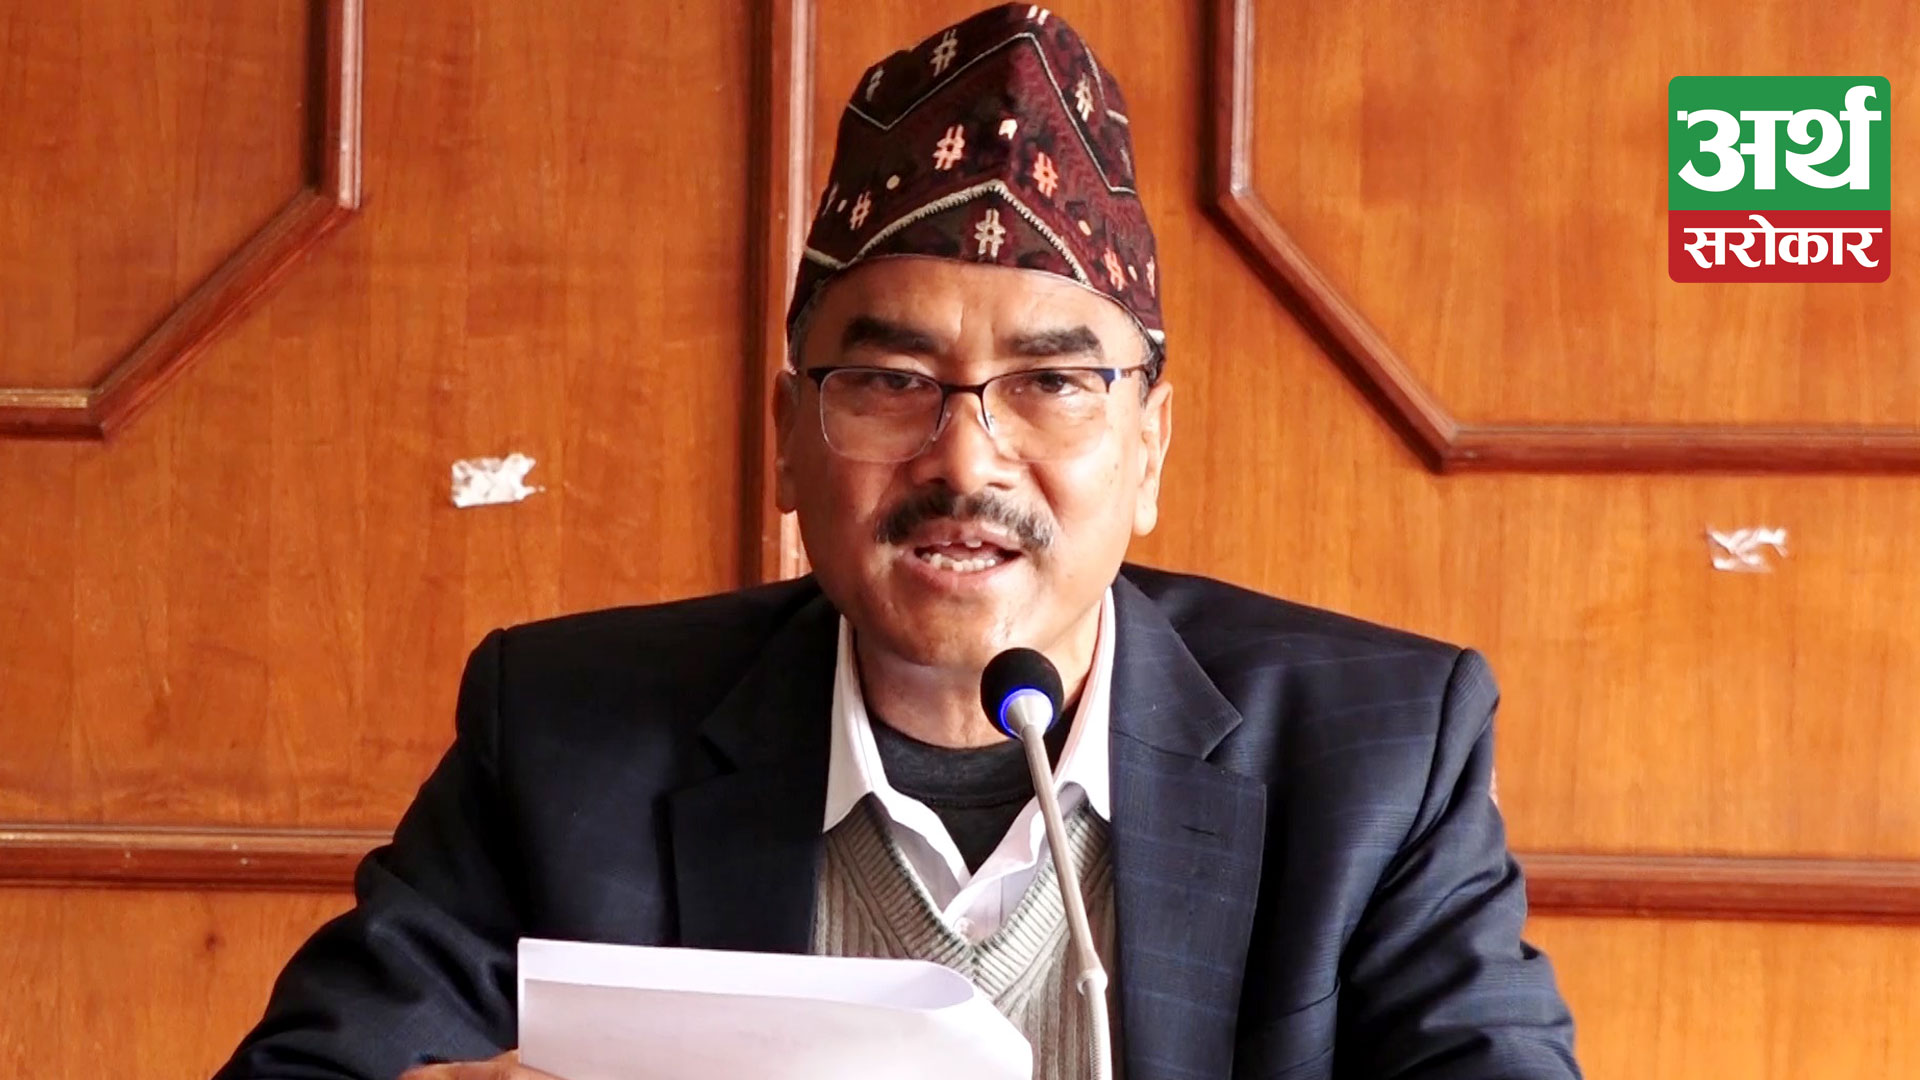 Work plan prepared for restoring Melamchi water supply by mid-April: Minister